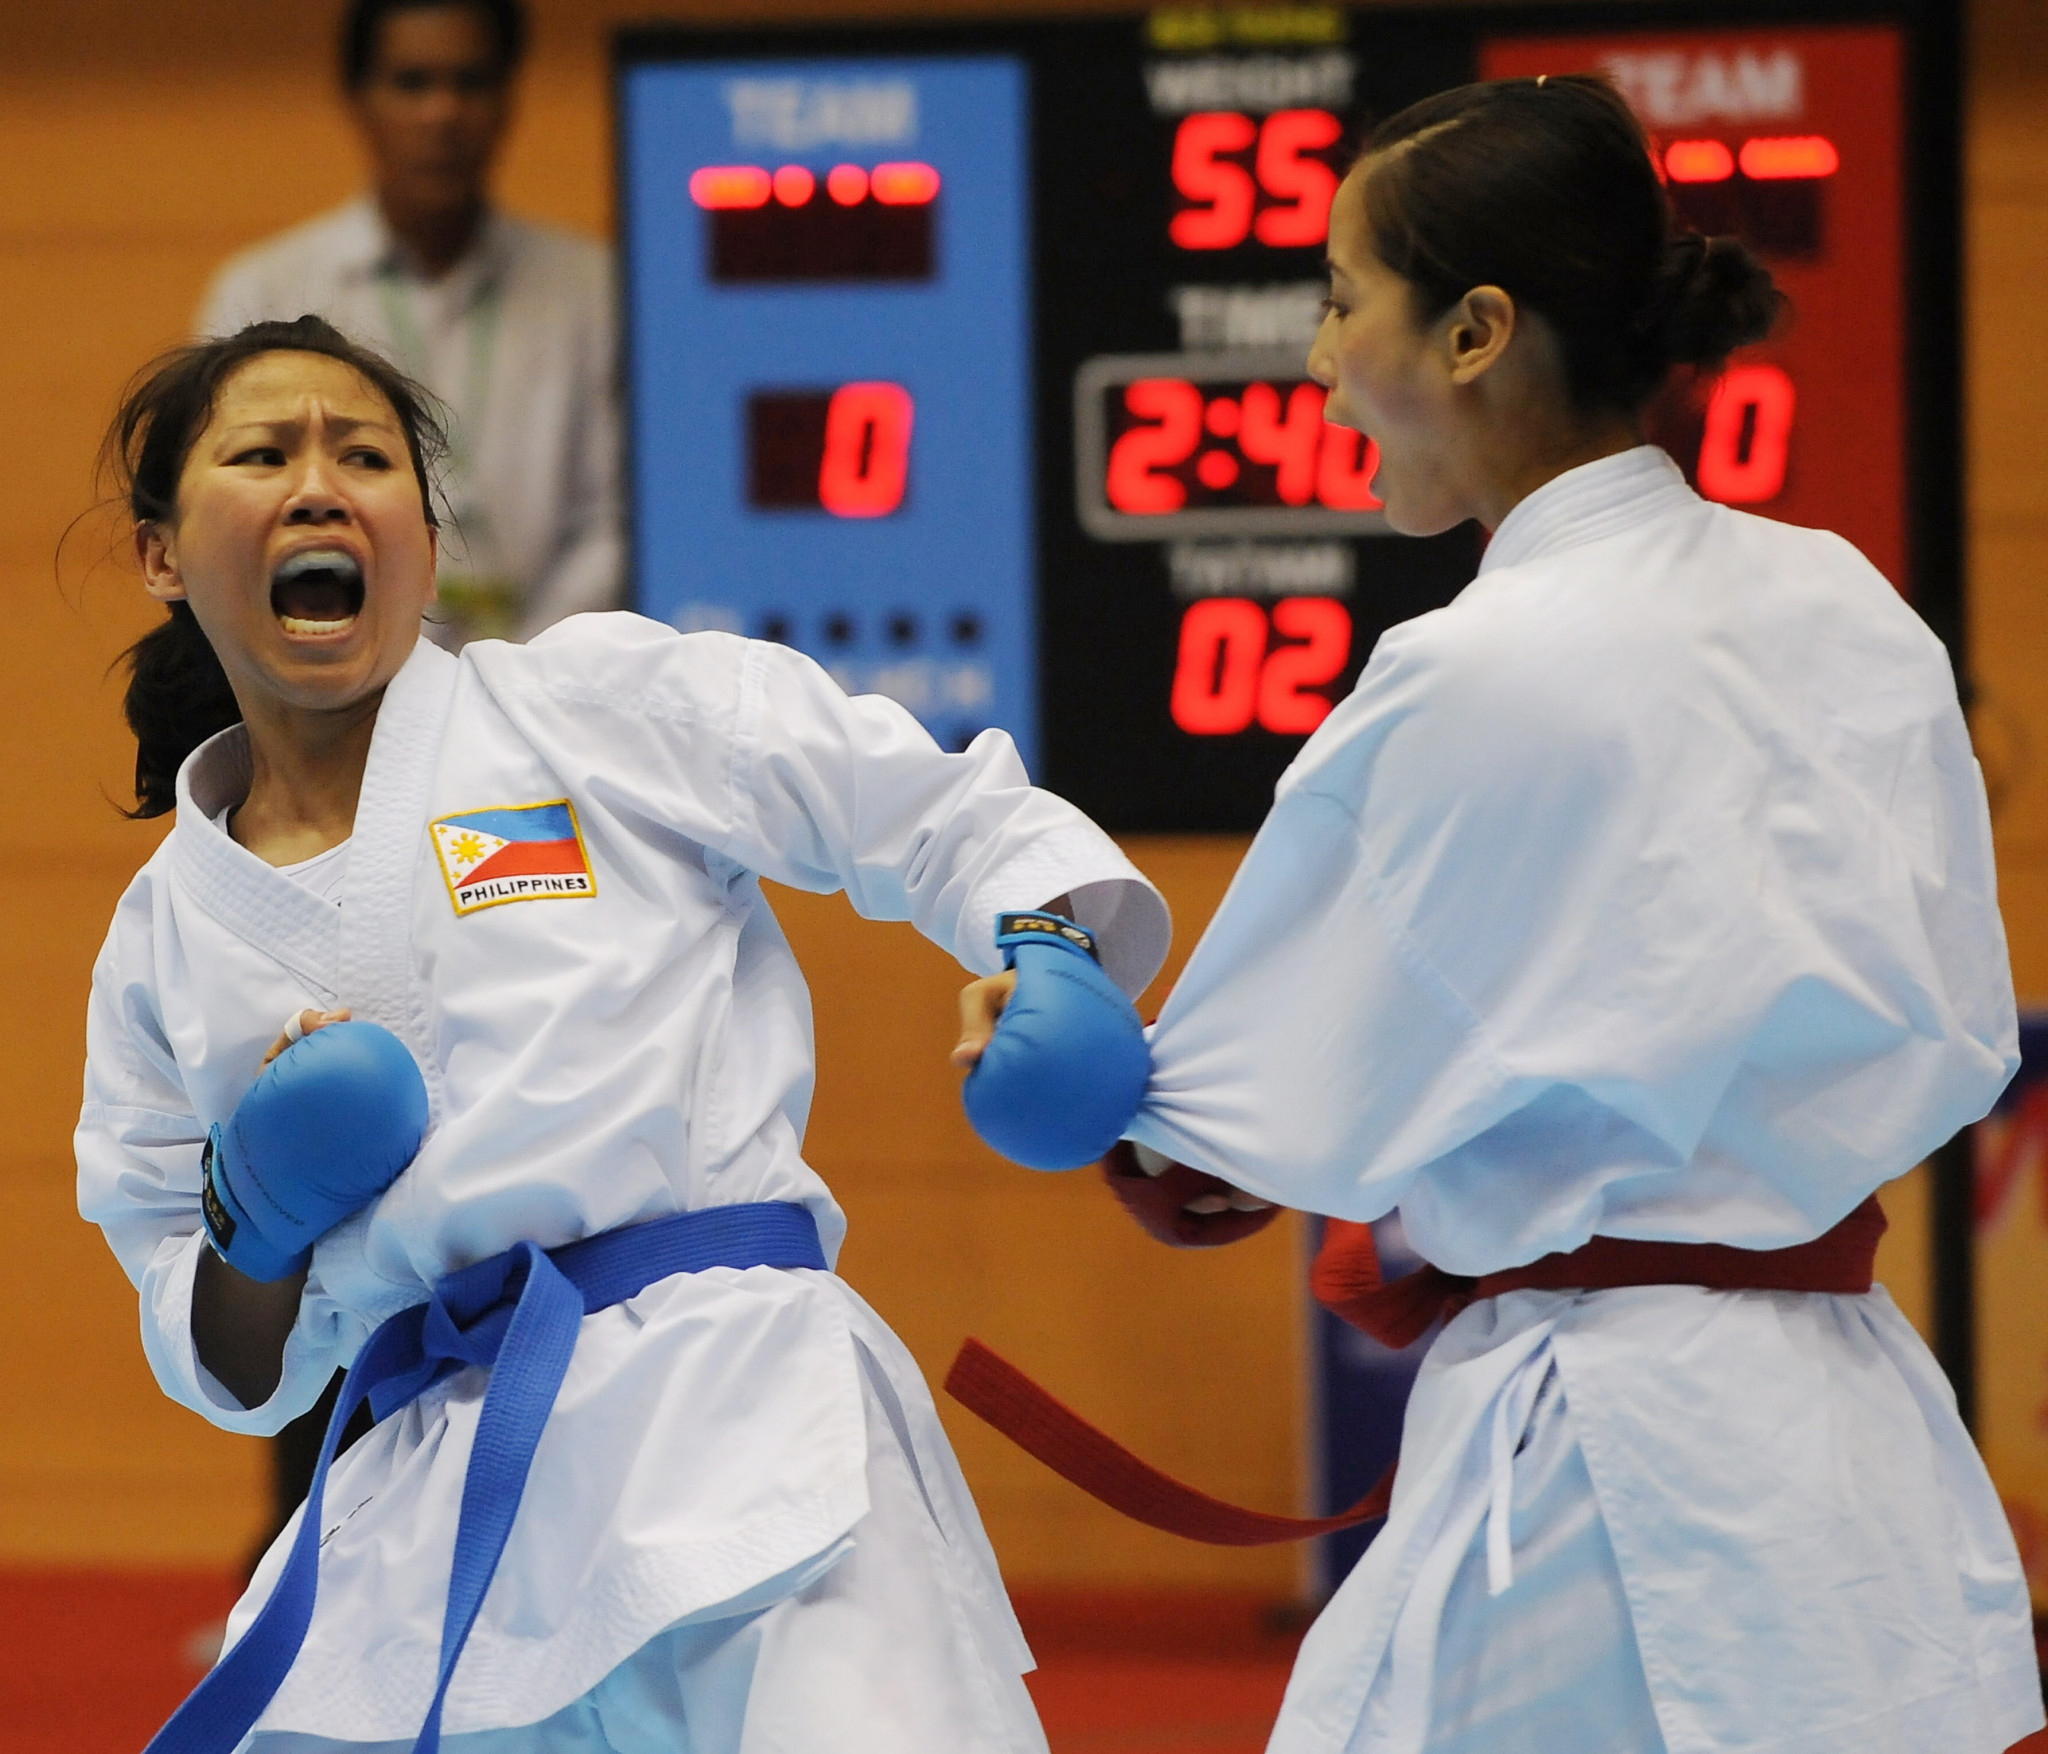 Karate and dancesport are set to be inducted as regular members of the Philippine Olympic Committee ©Getty Images